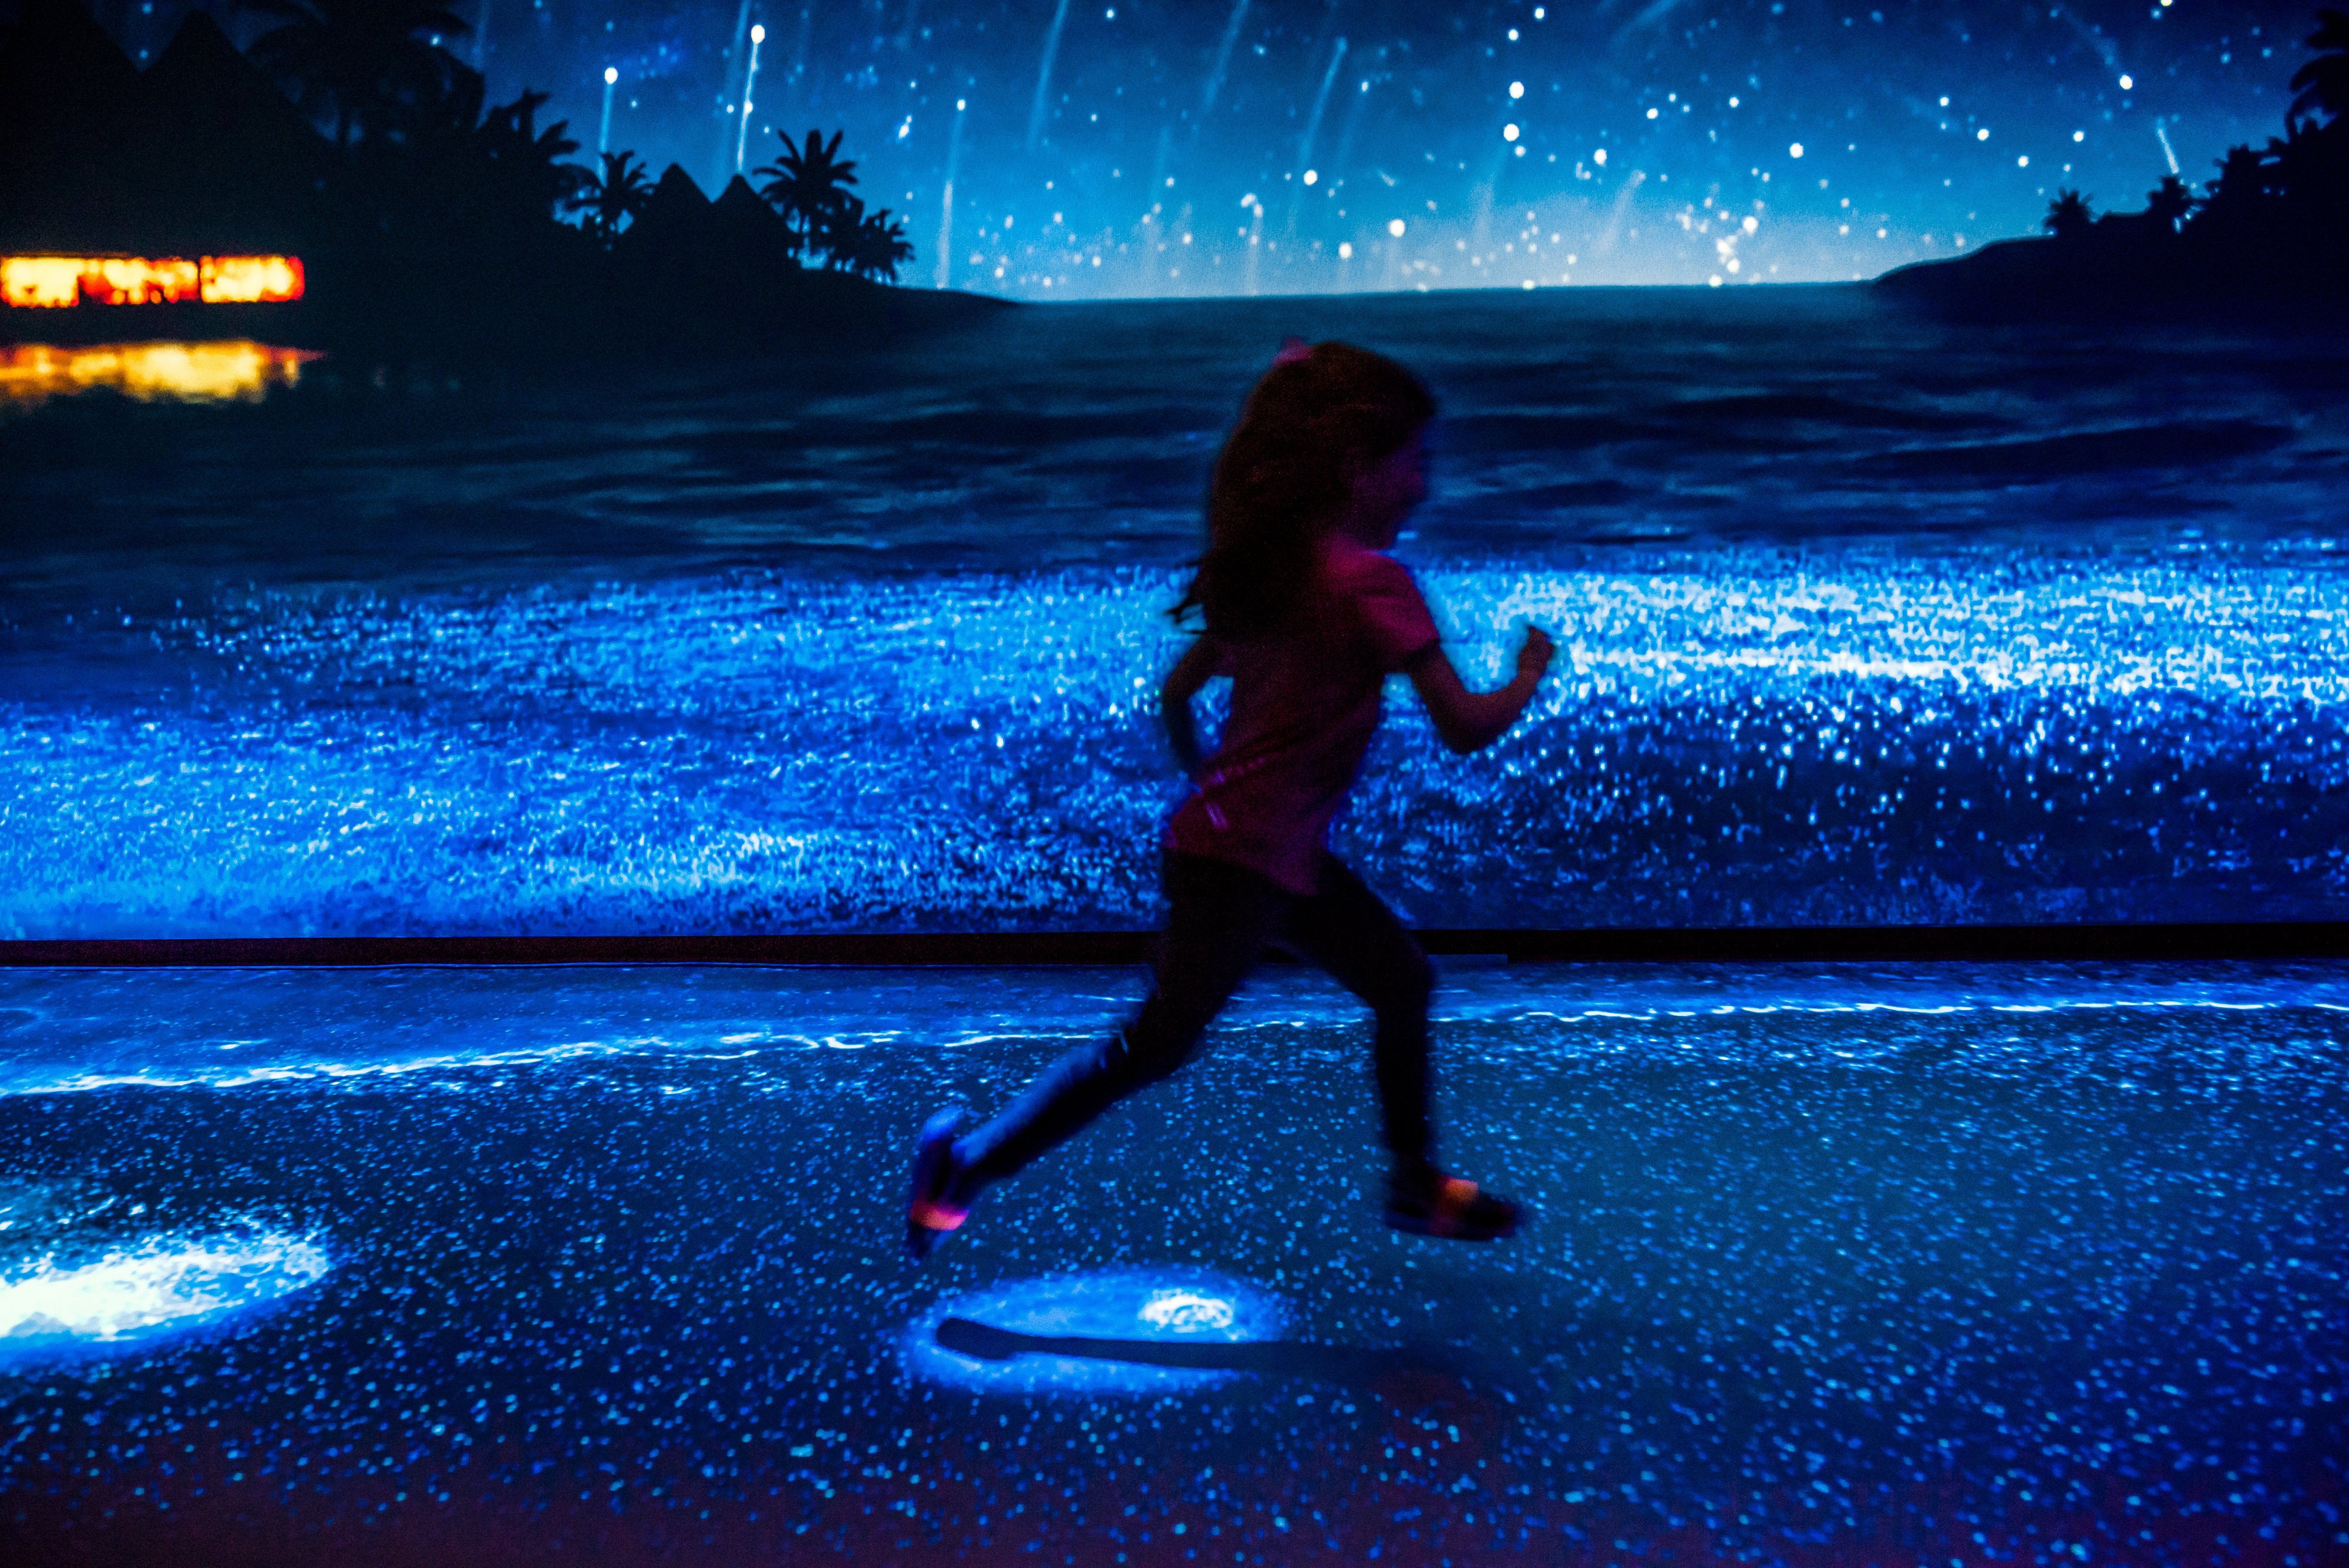 A Bioluminescent Beach Lights Up Guests Footsteps In Interactive Display (1)